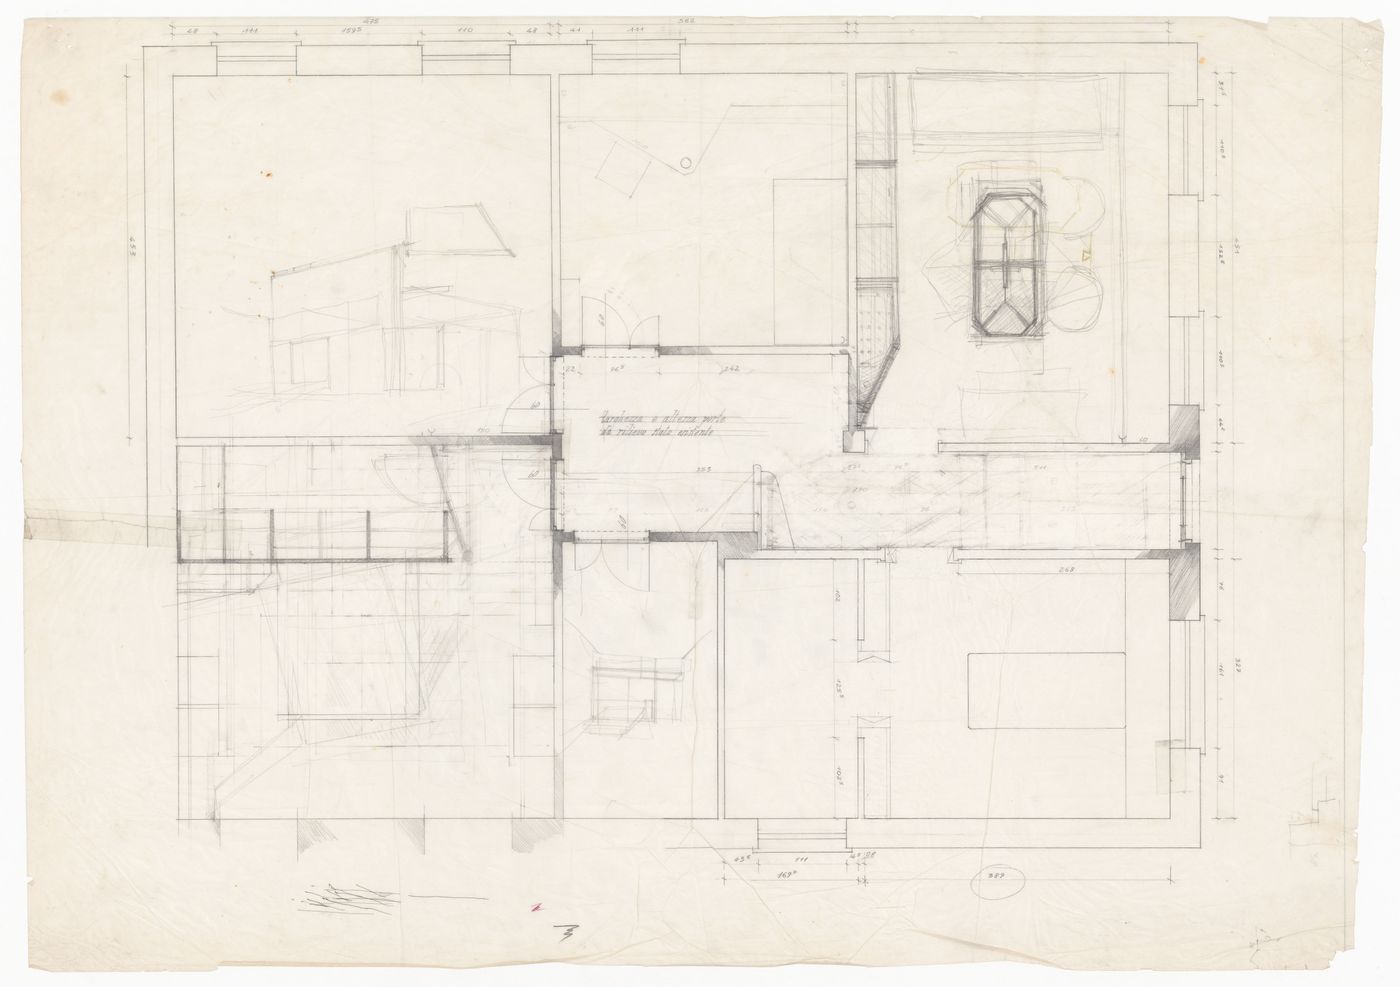 Floor plan with sketches for Casa Longhini, Milan, Italy